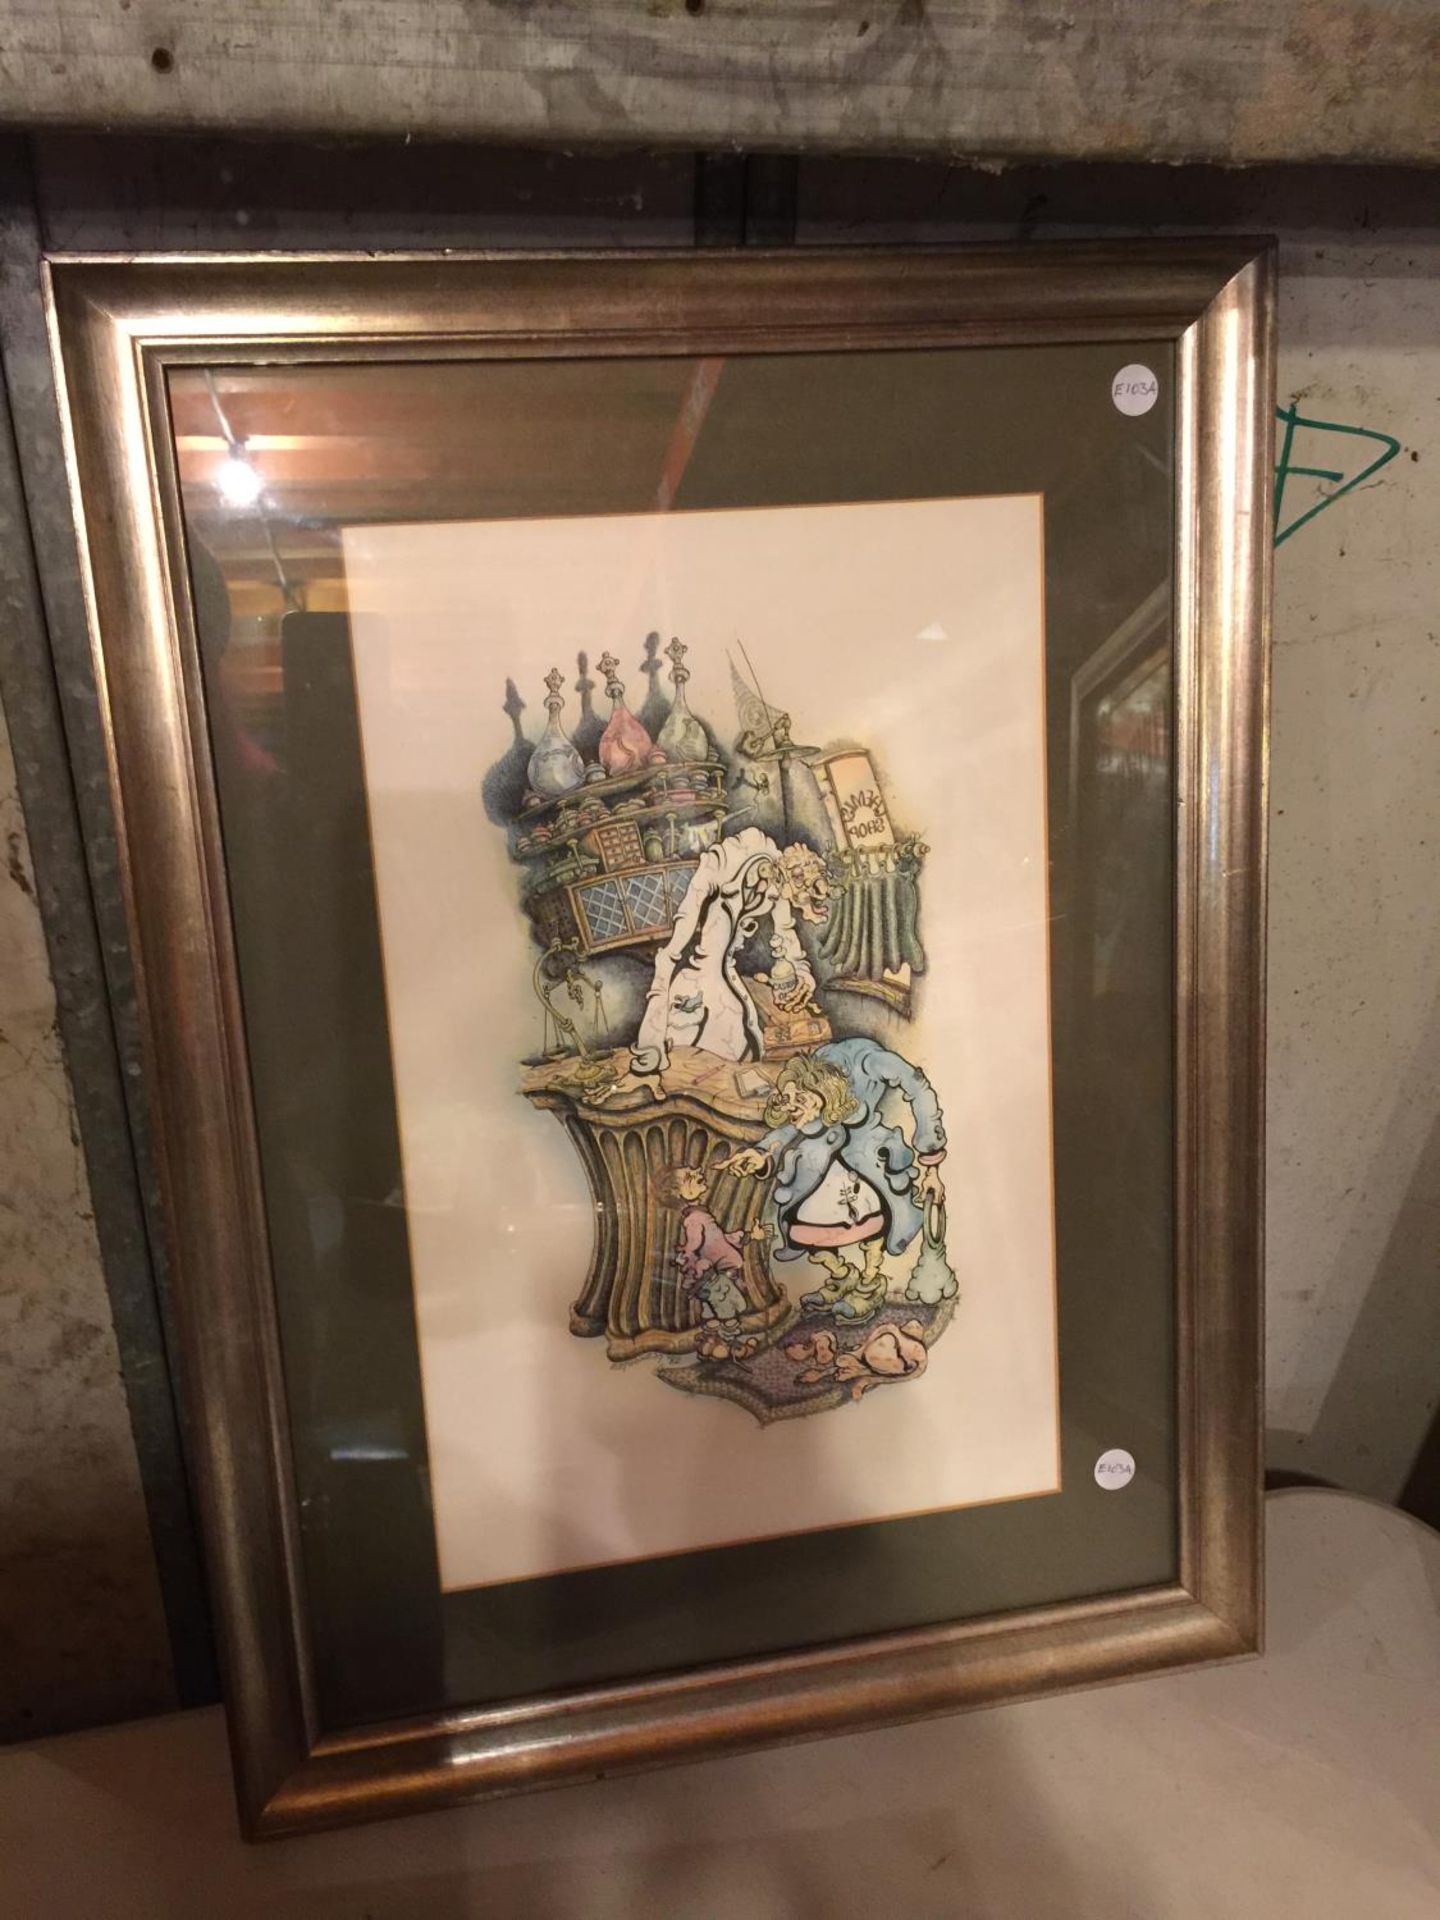 A FRAMED CARTOON PICTURE OF A CHEMISTS SHOP